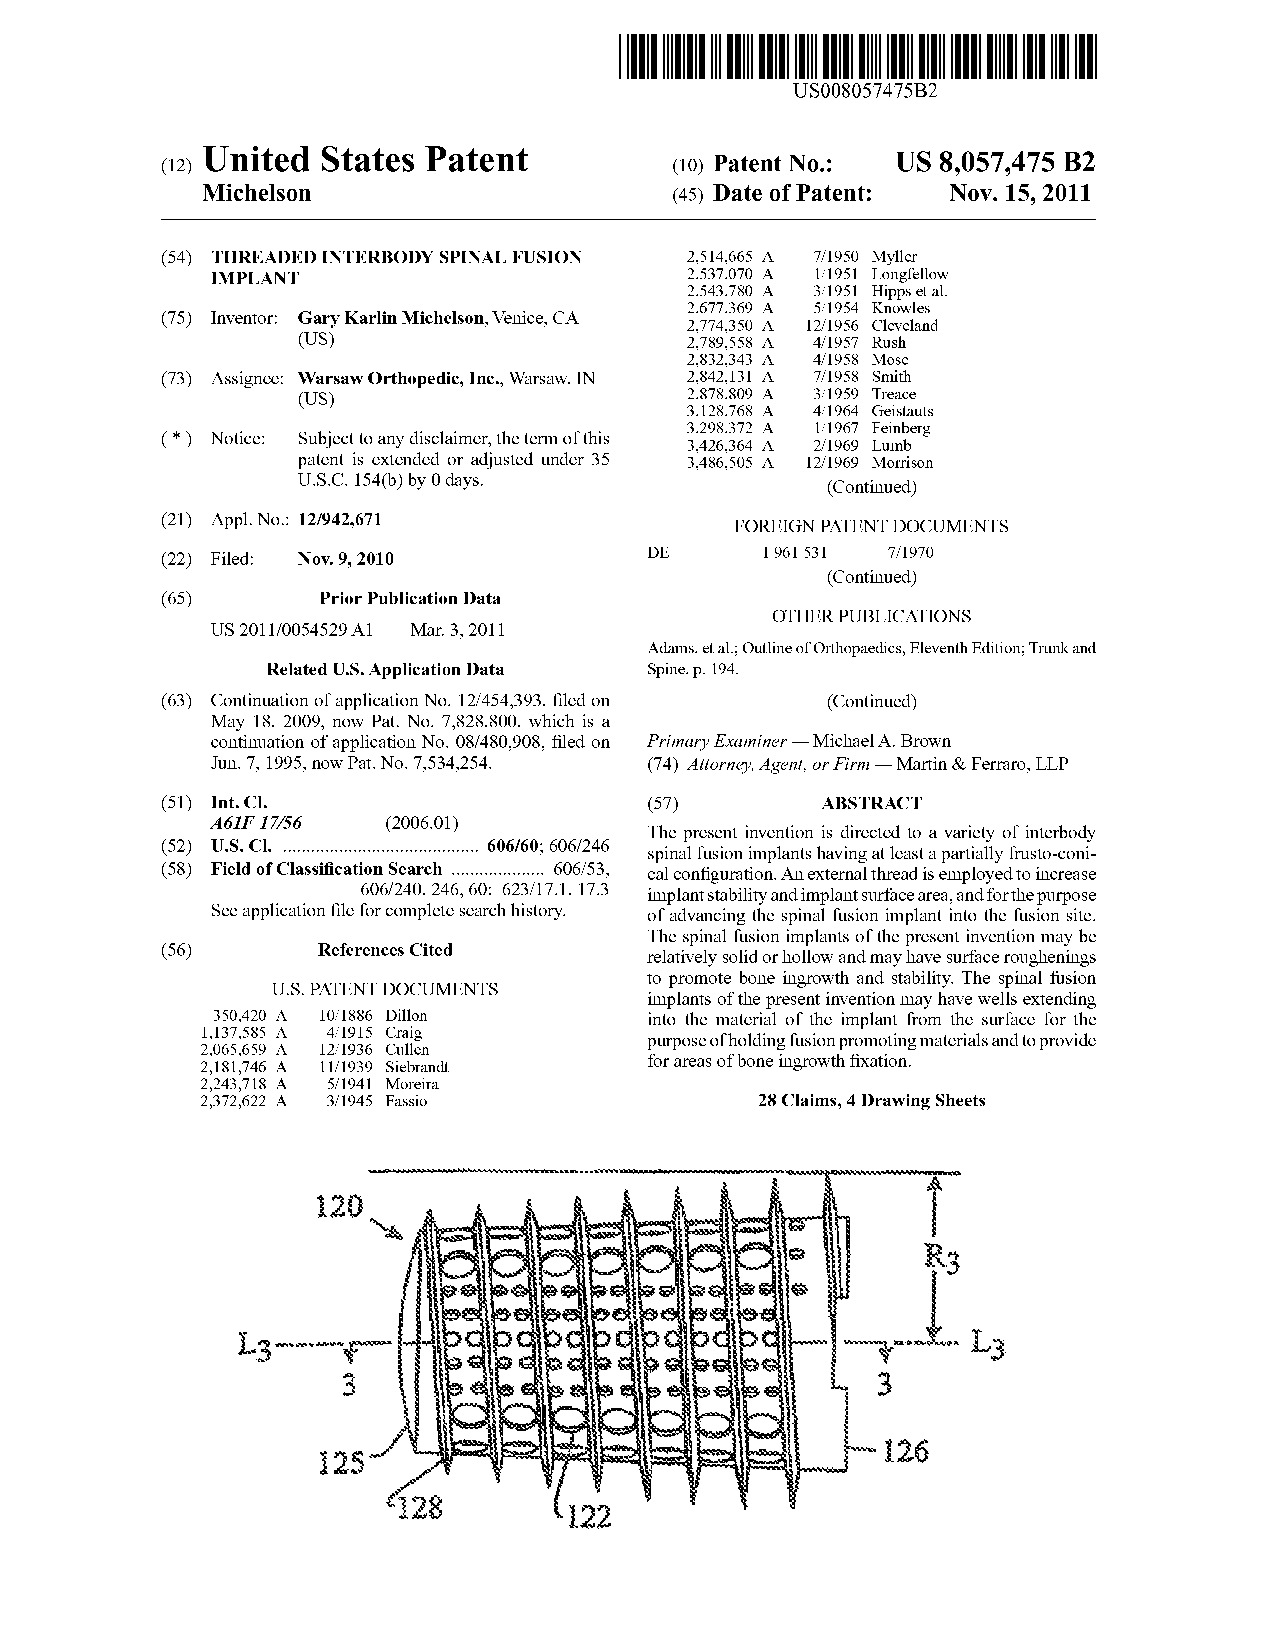 Threaded interbody spinal fusion implant - Patent 8,057,475